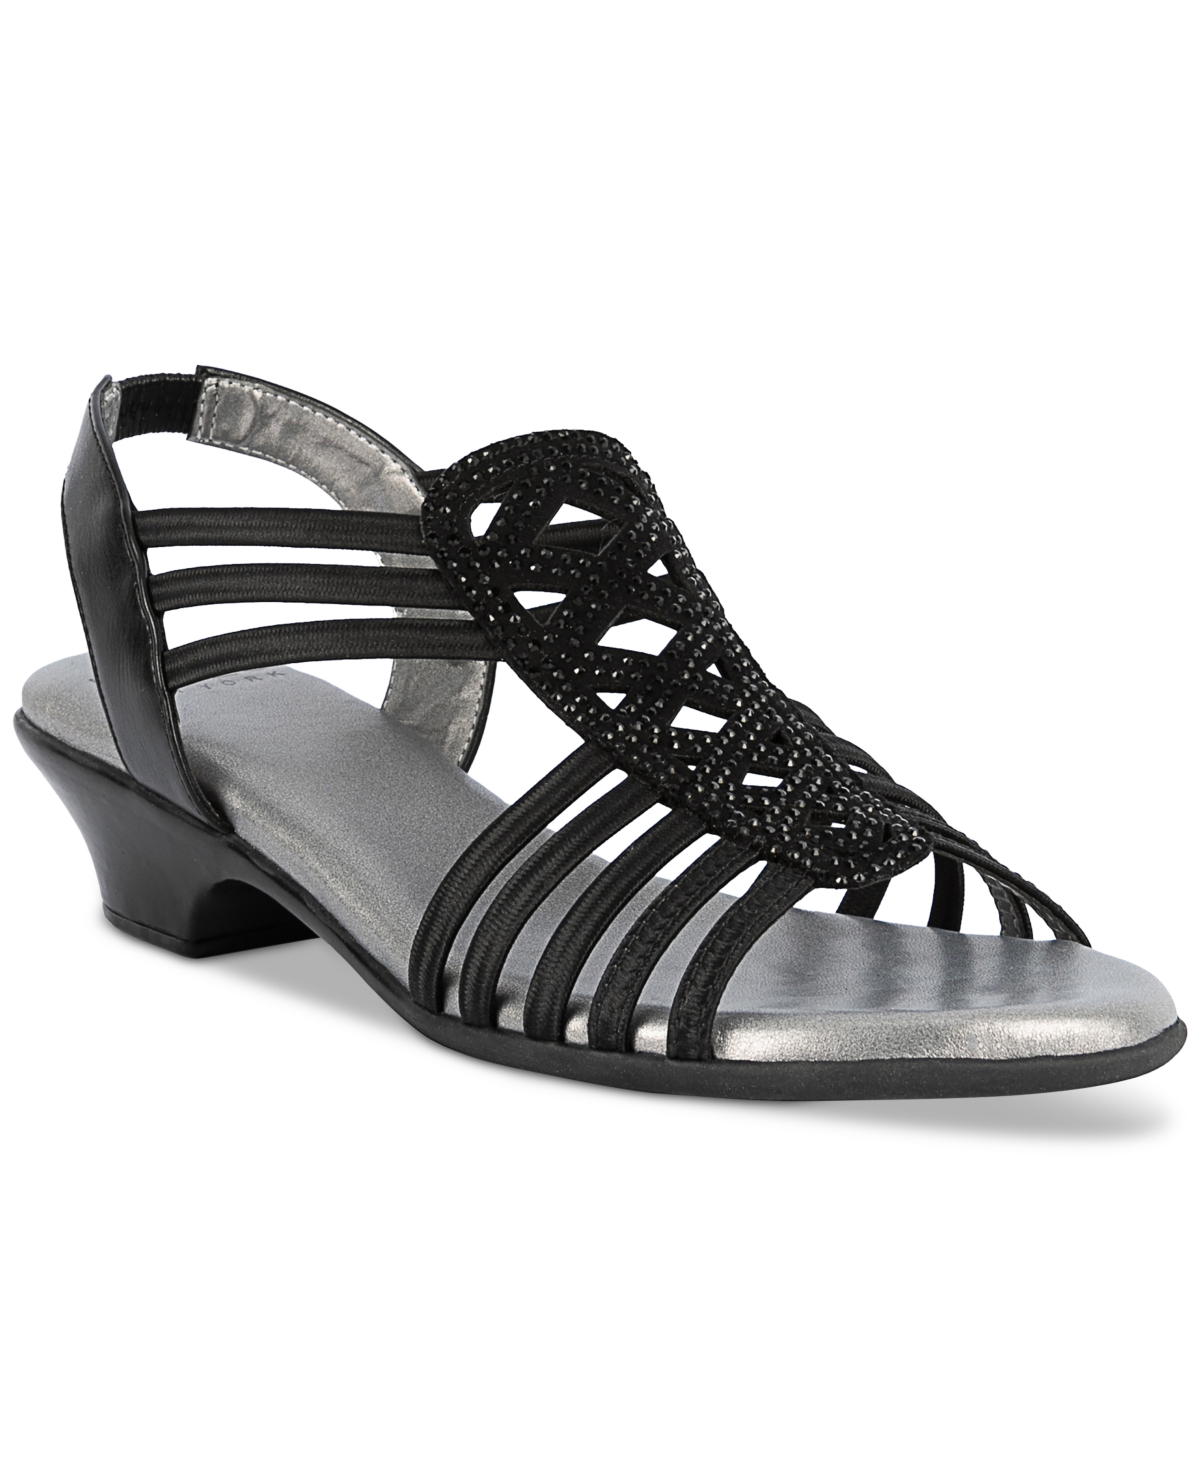 Ellya Strappy Slingback Dress Sandals, Created for Macy's - Silver